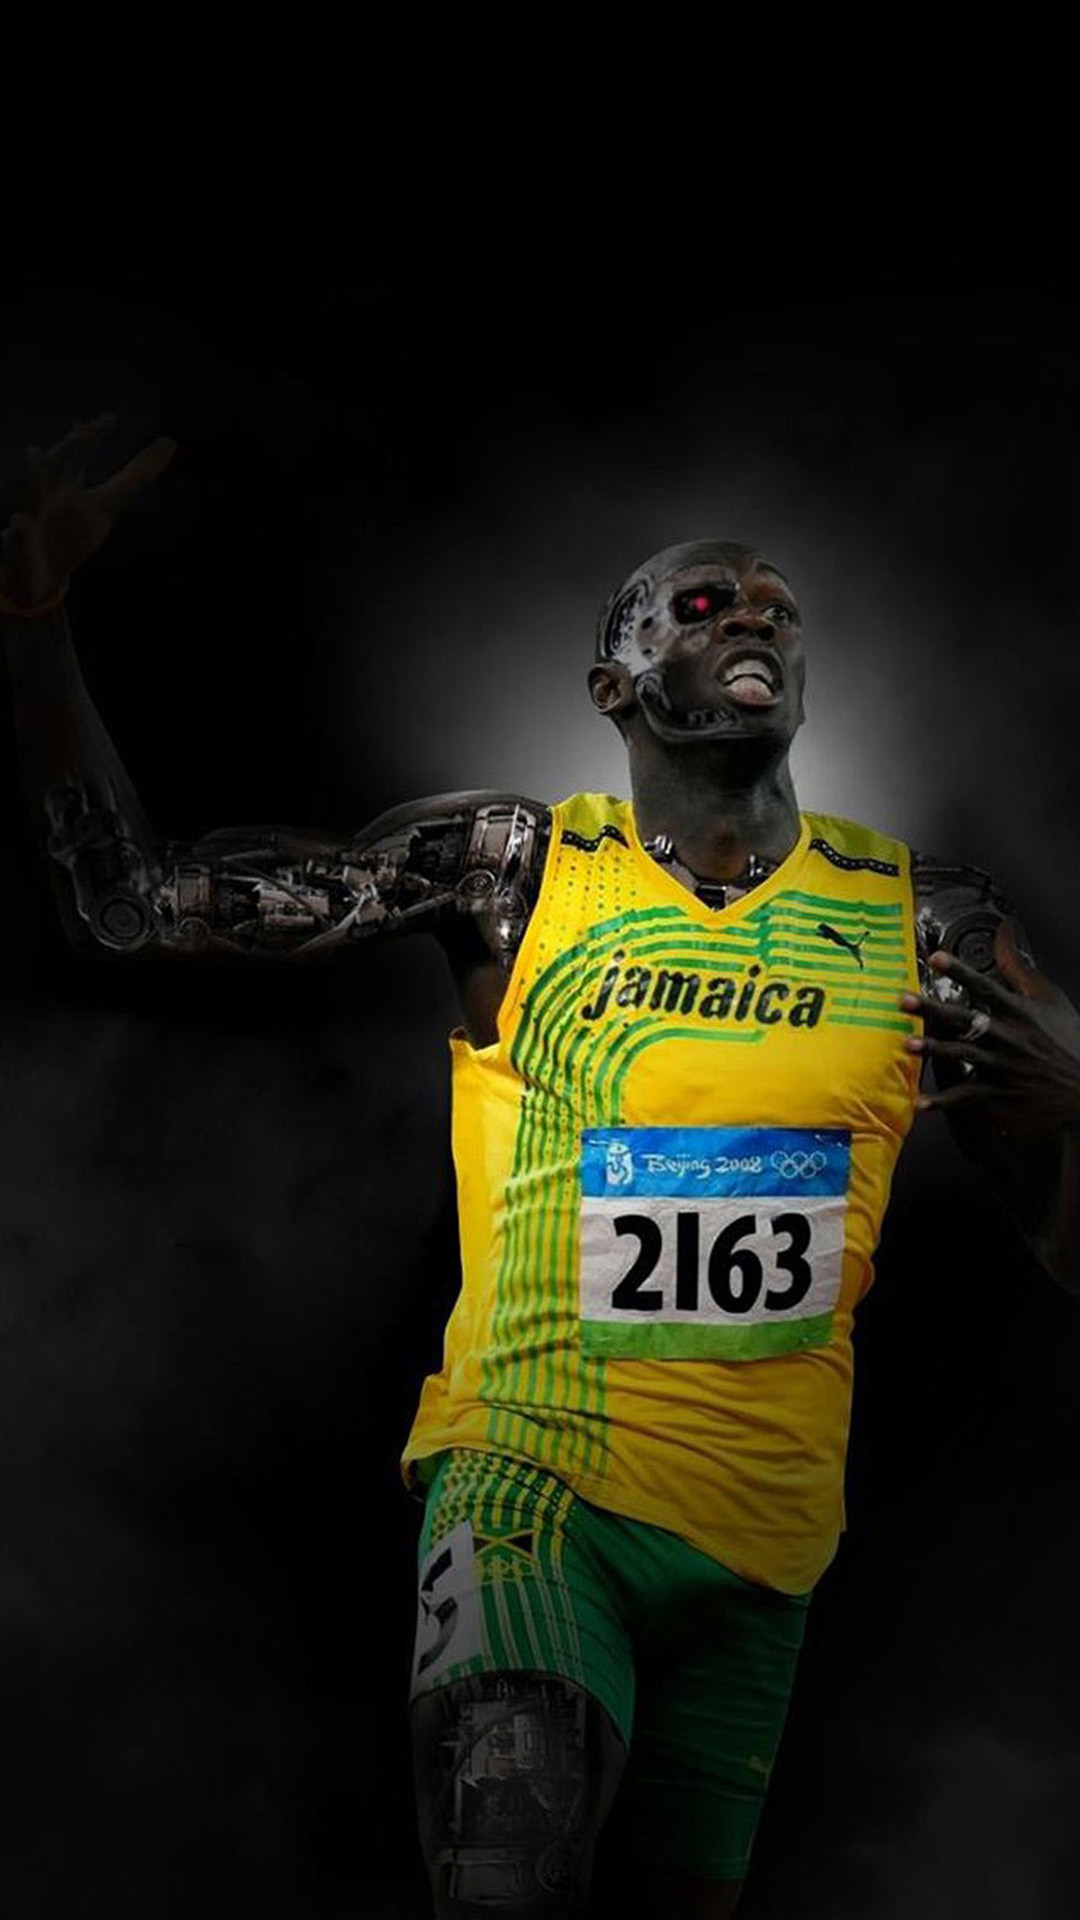 1080x1920 Usain Bolt download wallpaper for iPhone